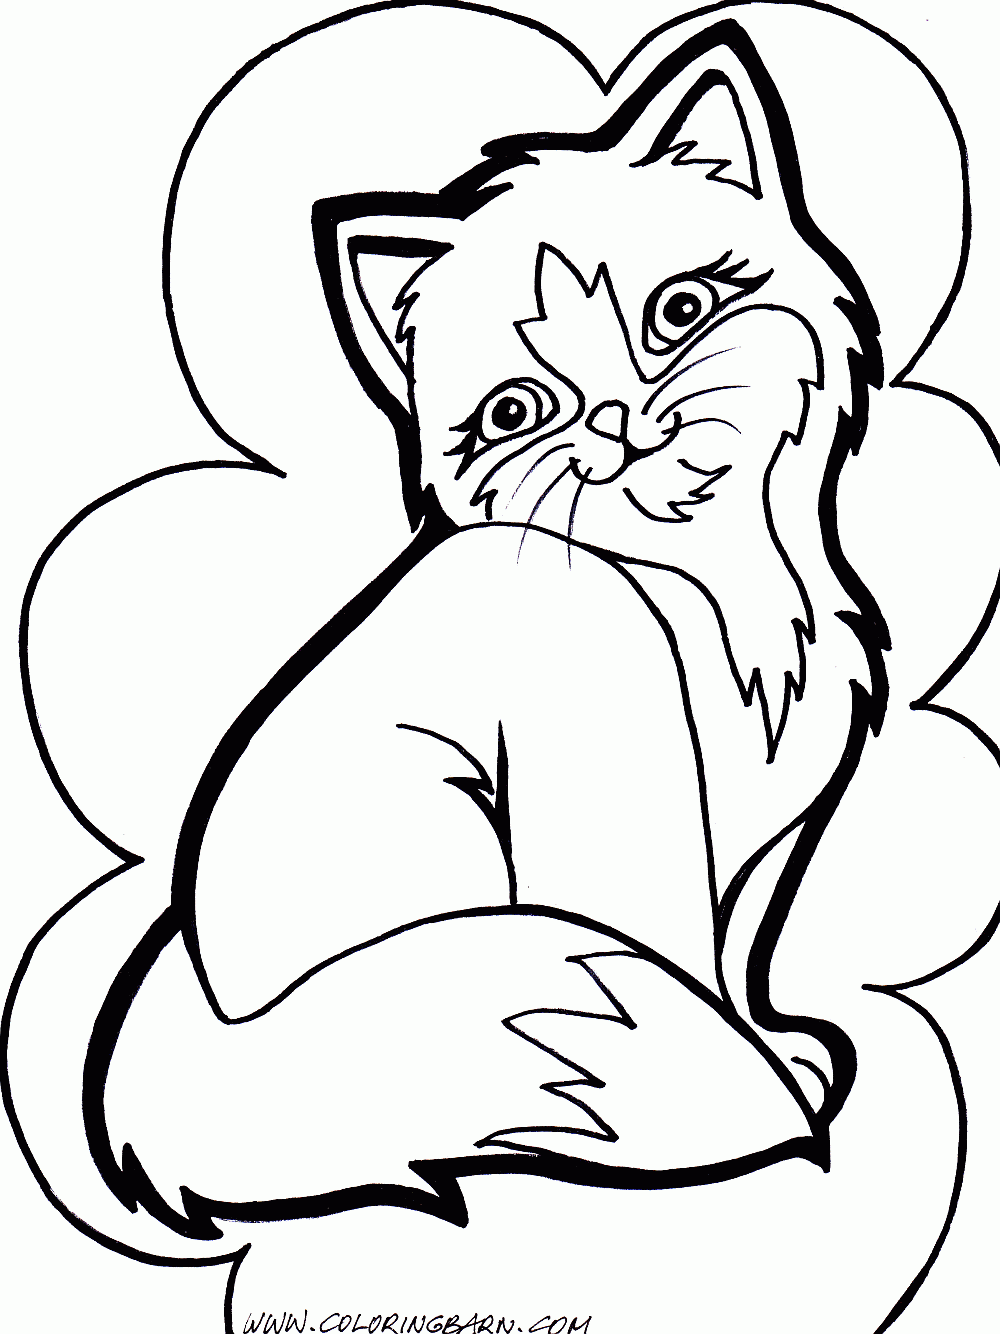 Free Puppy And Kitten Coloring Page, Download Free Puppy And Kitten